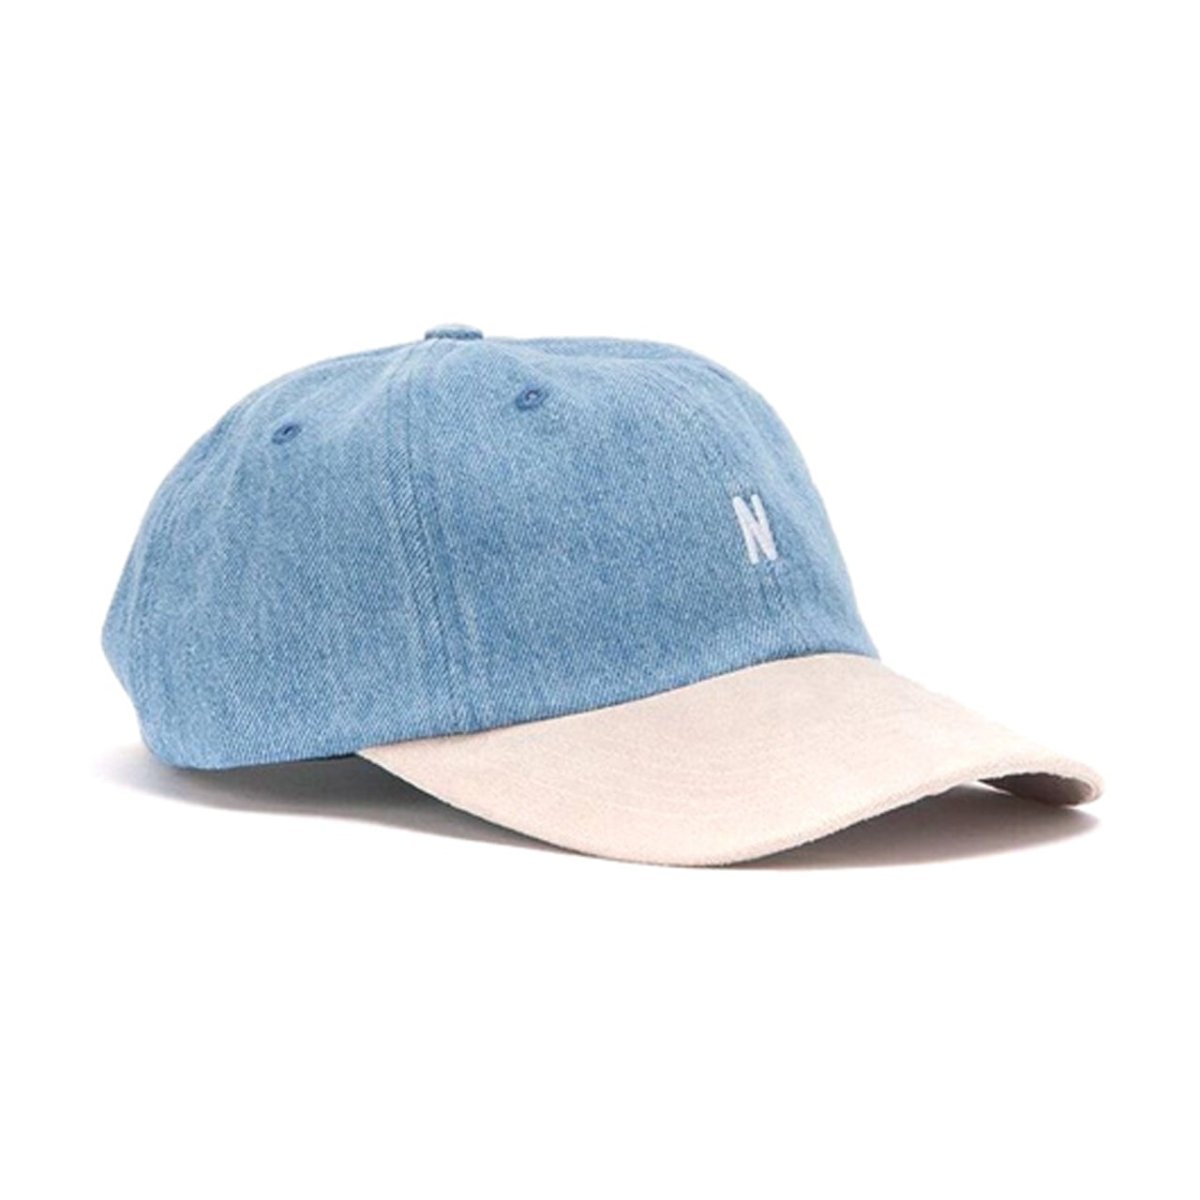 Norse Projects Denim Sports Cap (Sunwashed)  - Allike Store